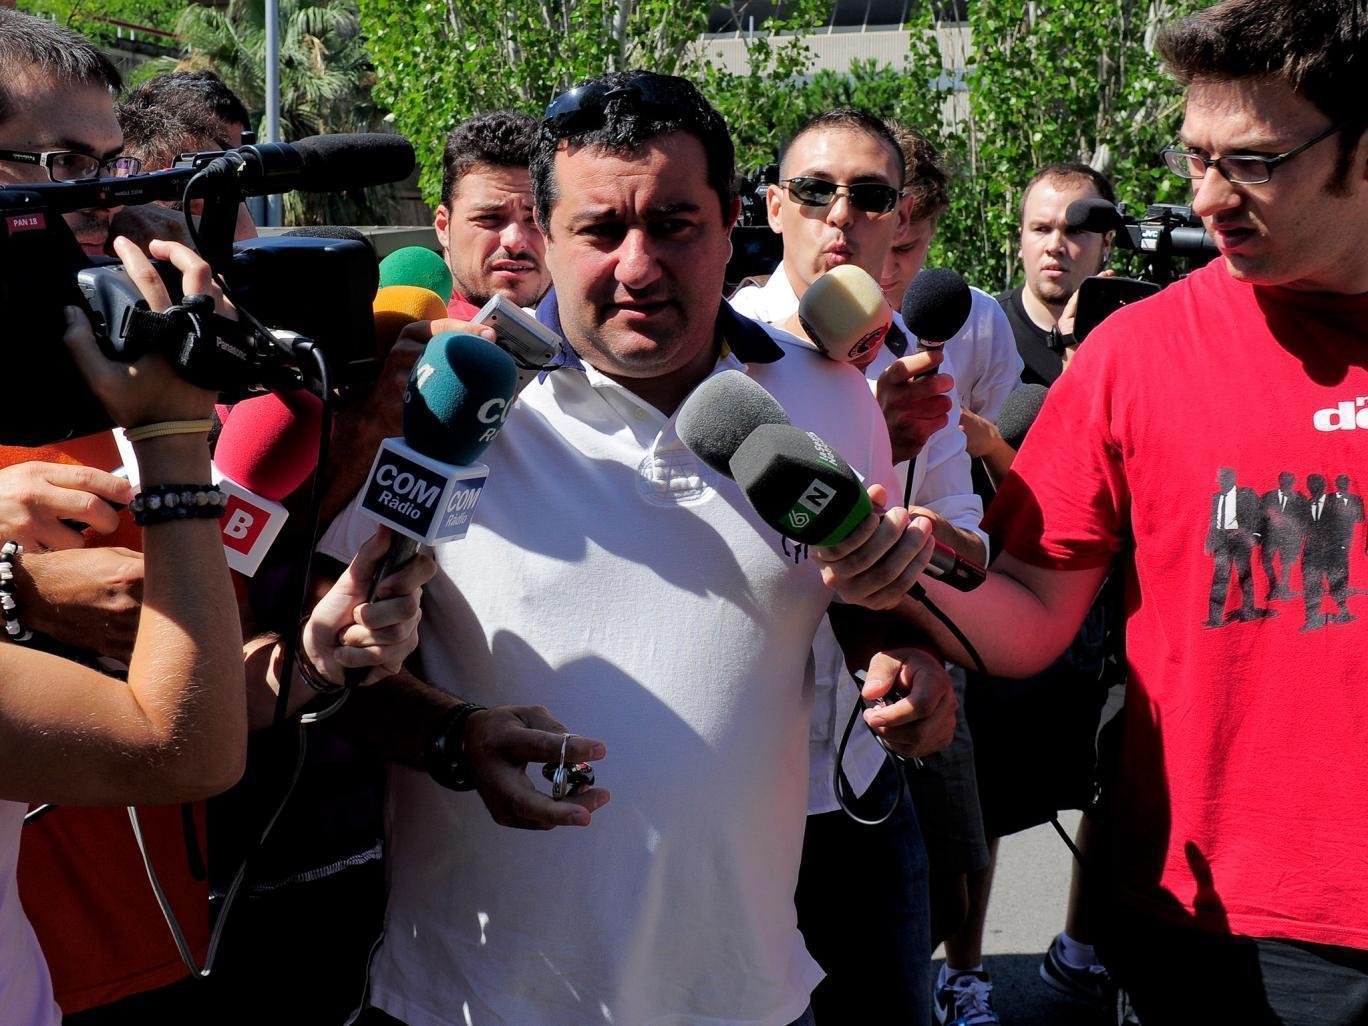 Mino Raiola has become something of a sticking point in the Pogba transfer